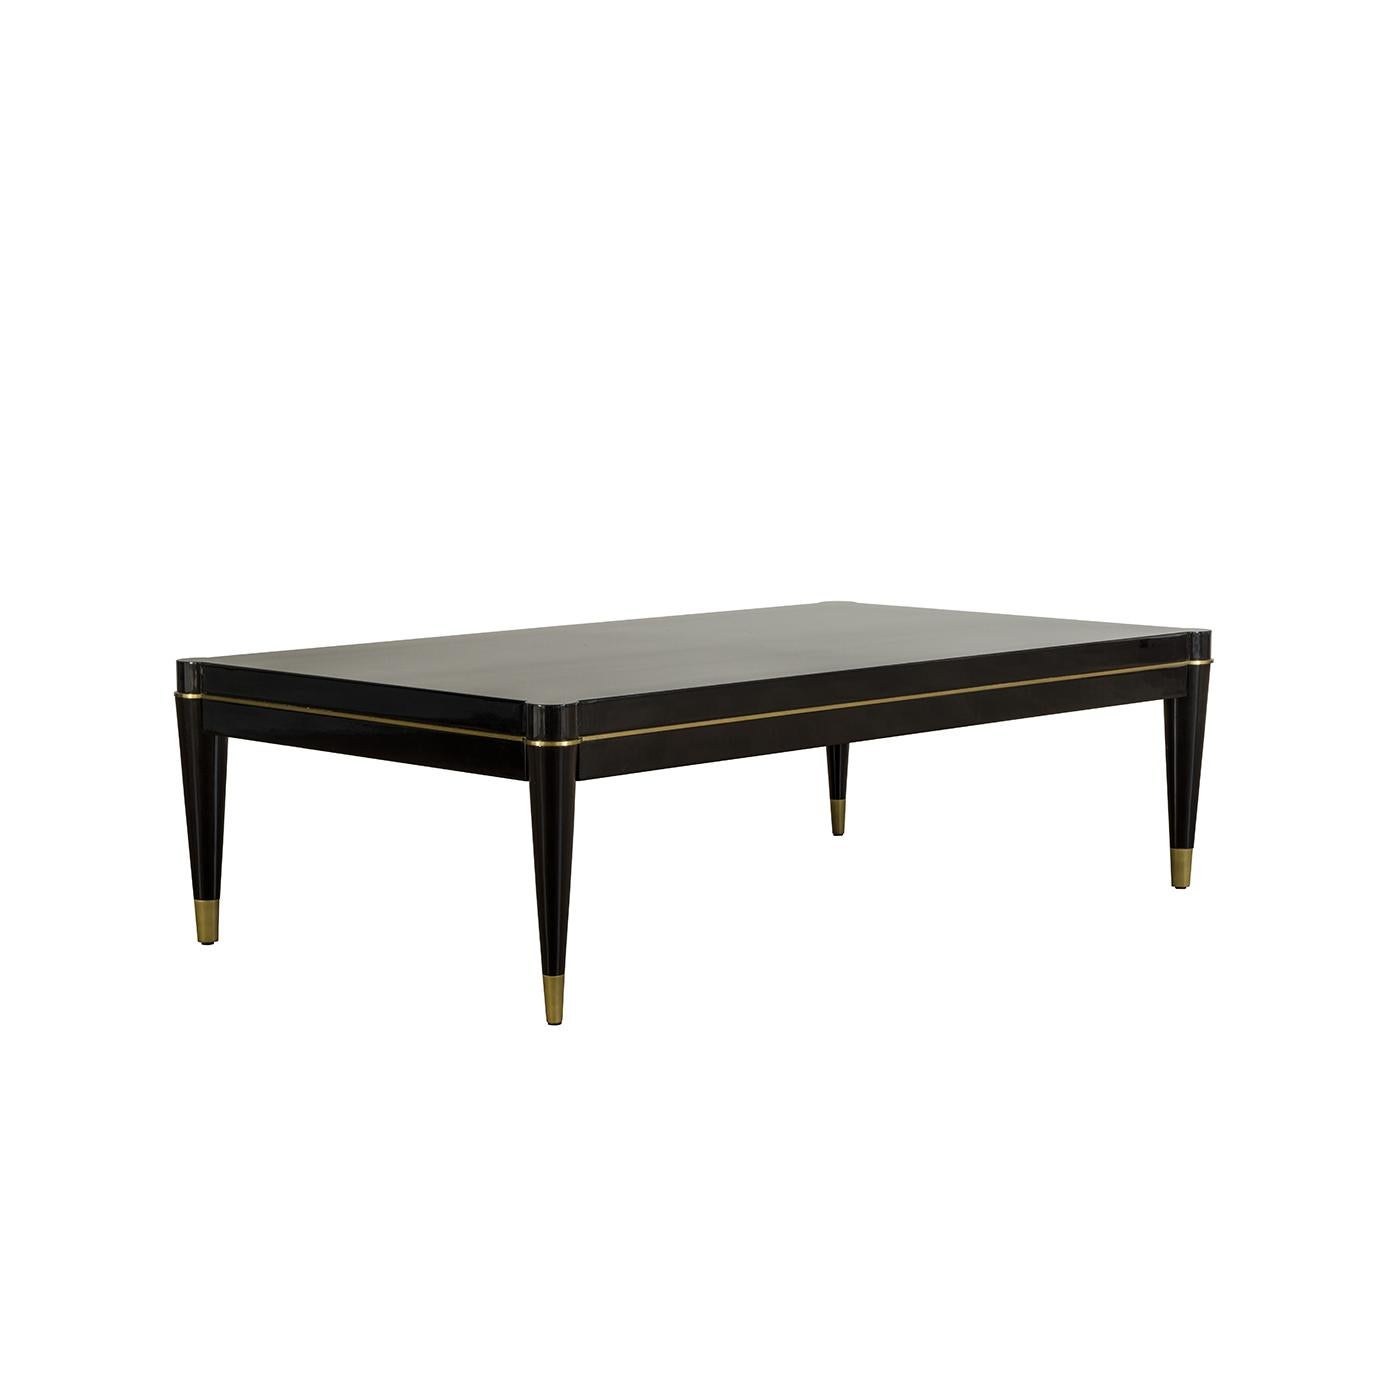 This stunning coffee table is an exquisite statement piece for either a modern or a Classic living room. Part of the Ambra collection, it can be combined with the others in the same series. The wooden structure comprises a base with four tapered